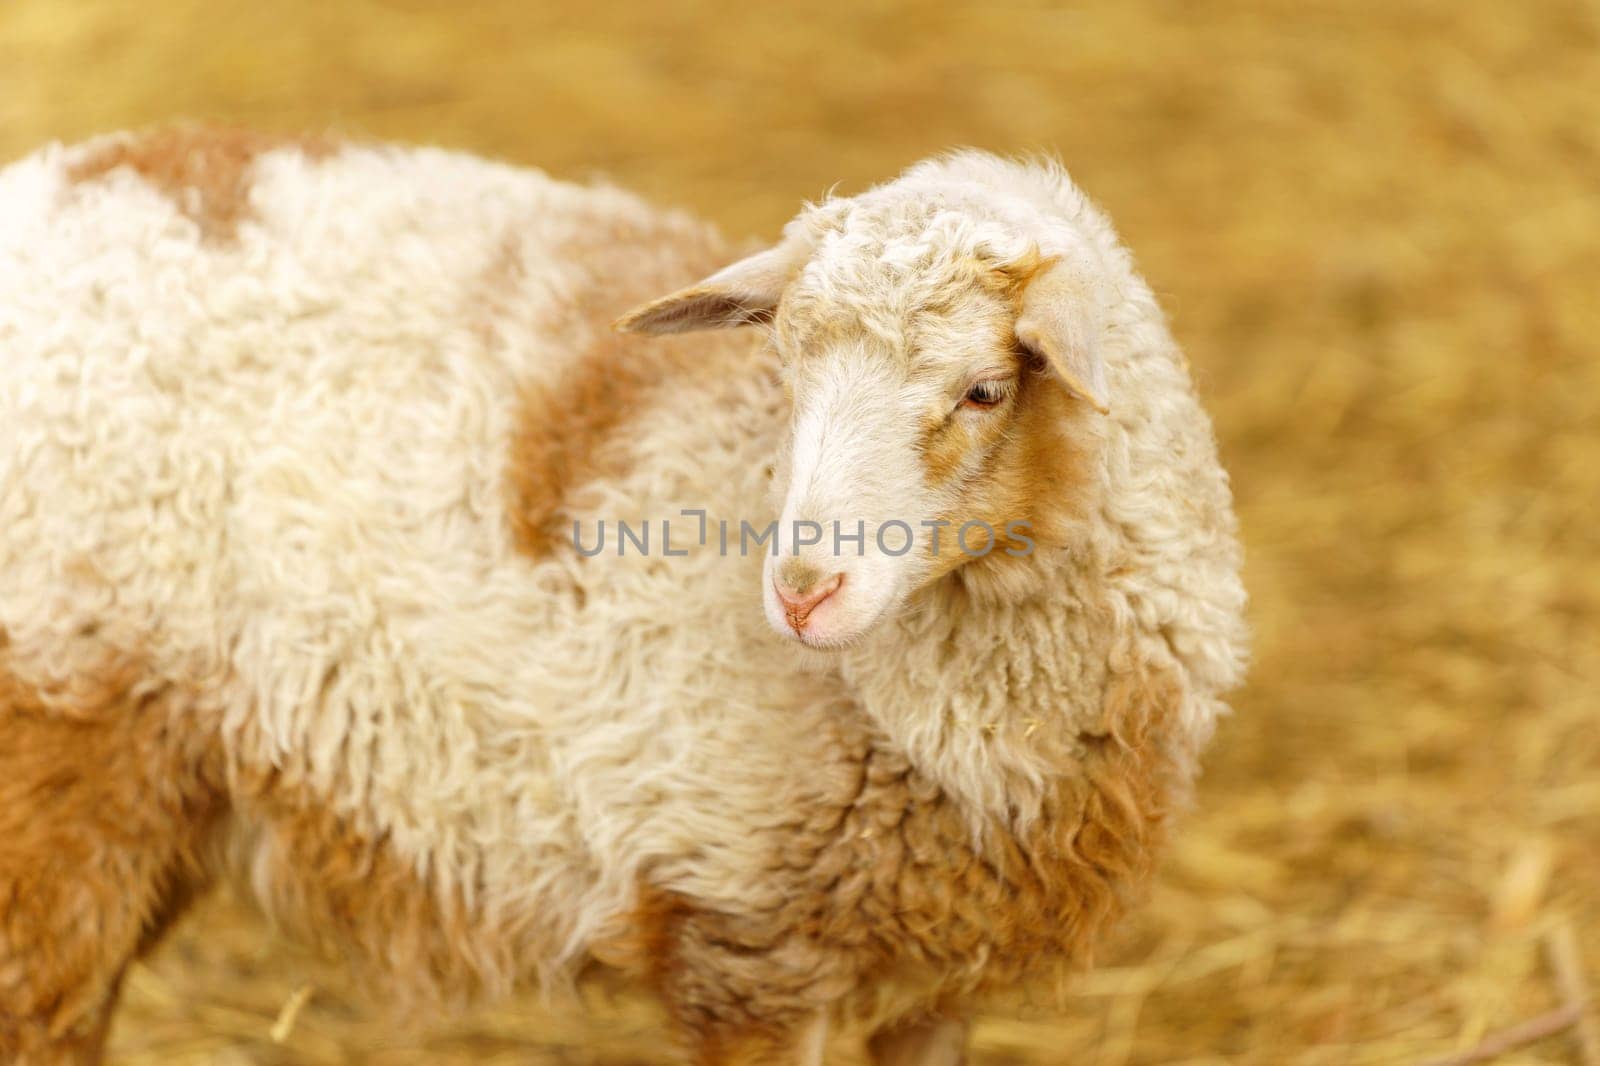 Sheep peacefully stands surrounded by golden hay in a farm pen, showcasing a serene and idyllic rural scene.